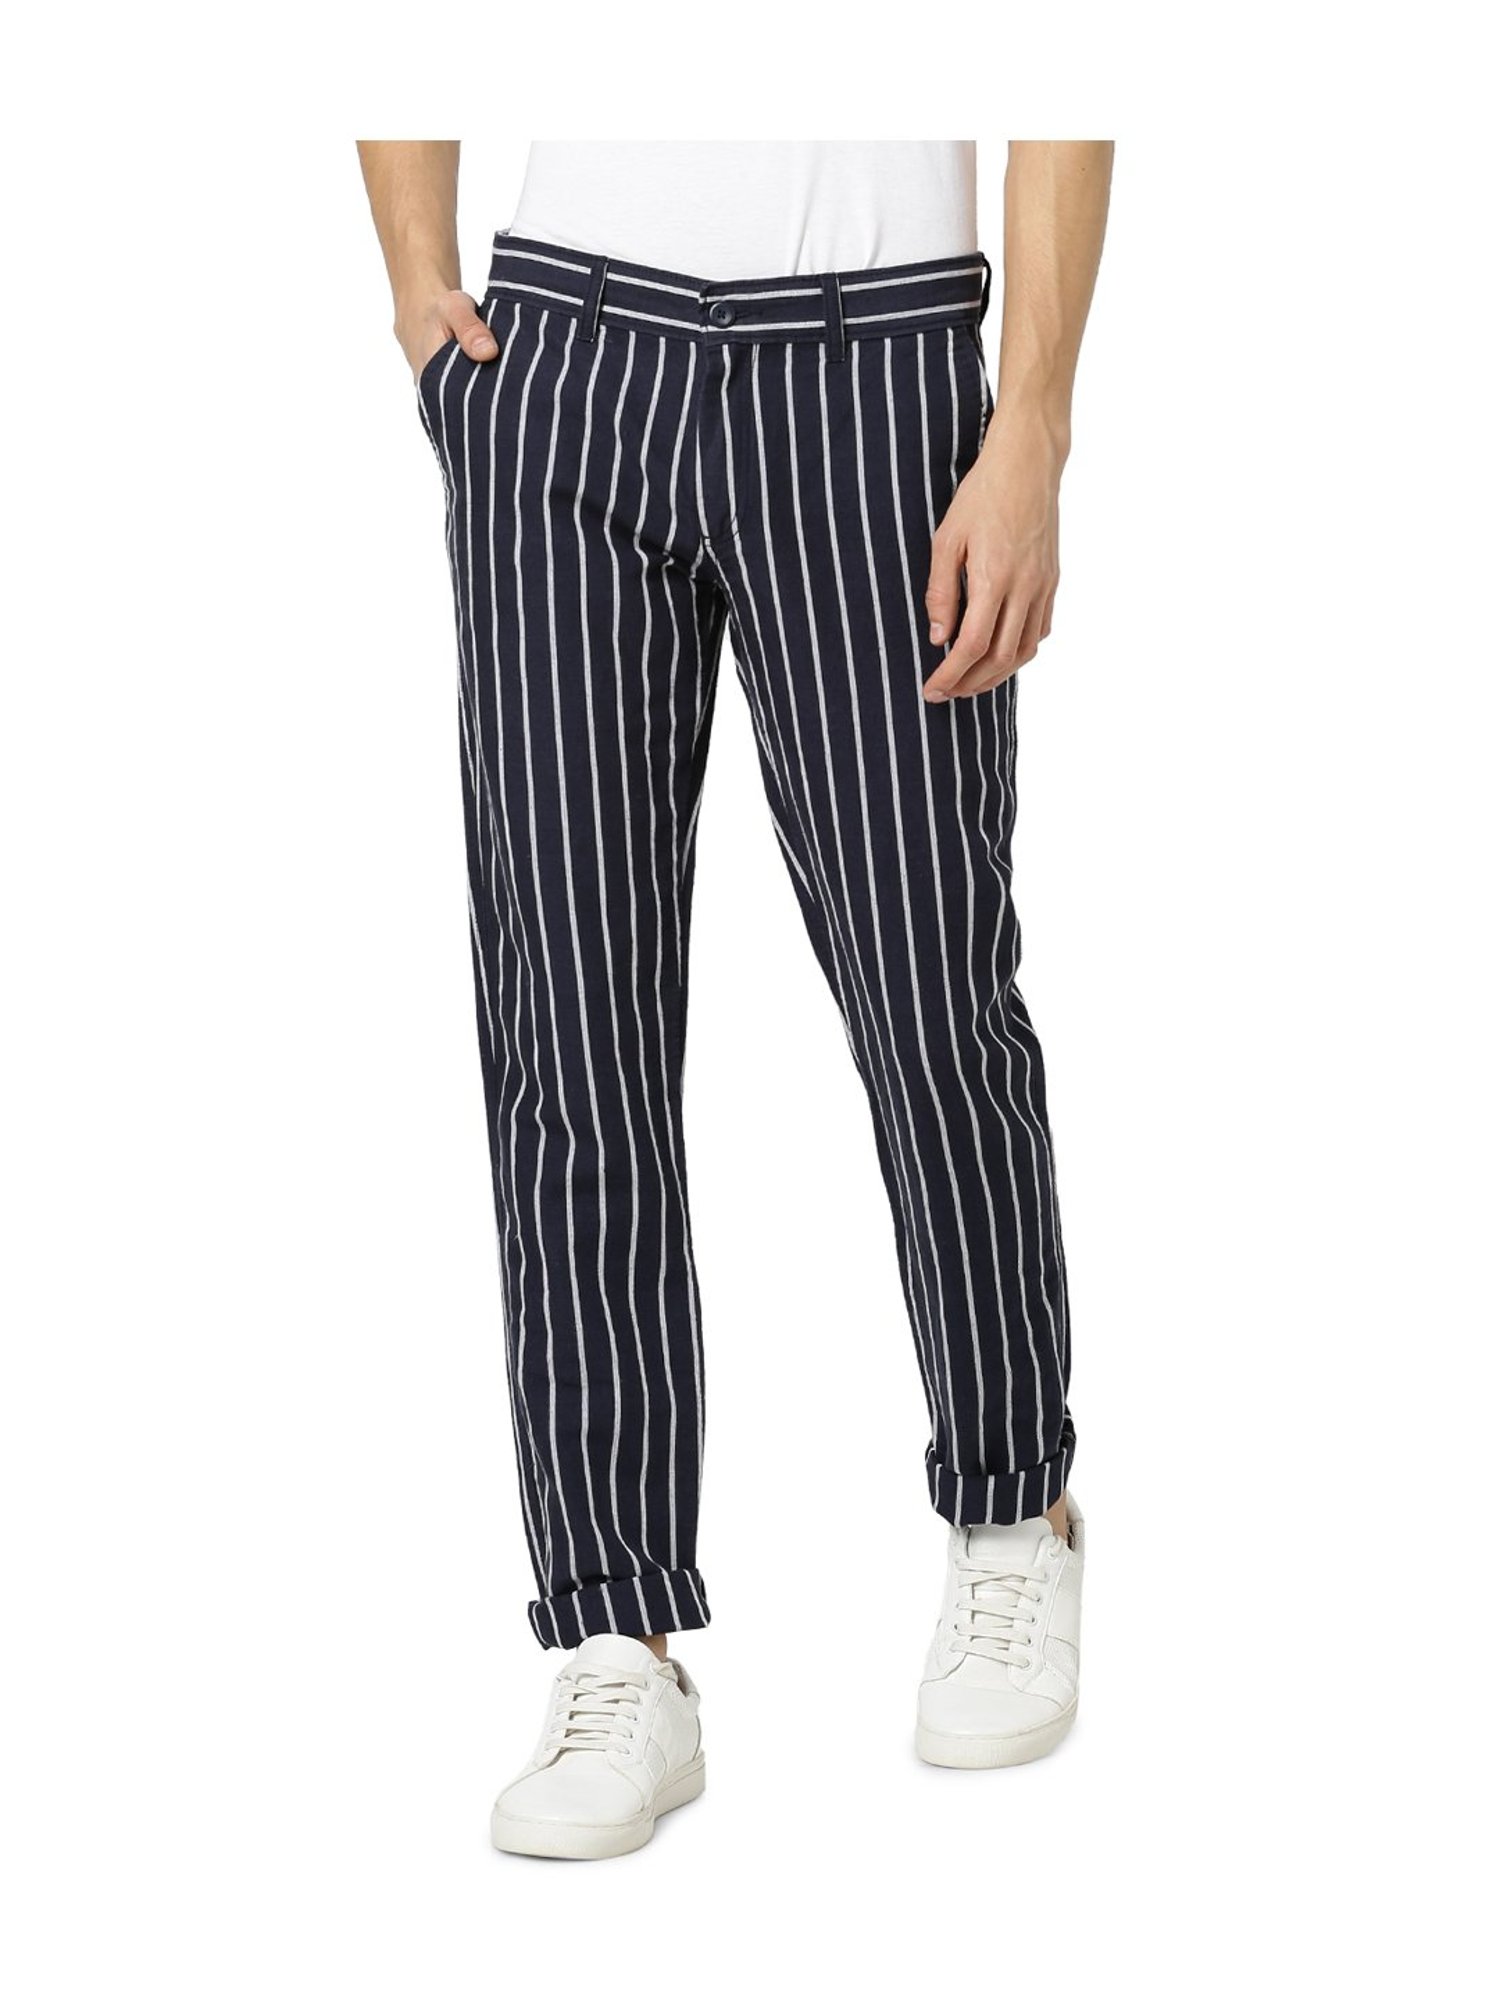 White And Blue Striped Flat Front Pants